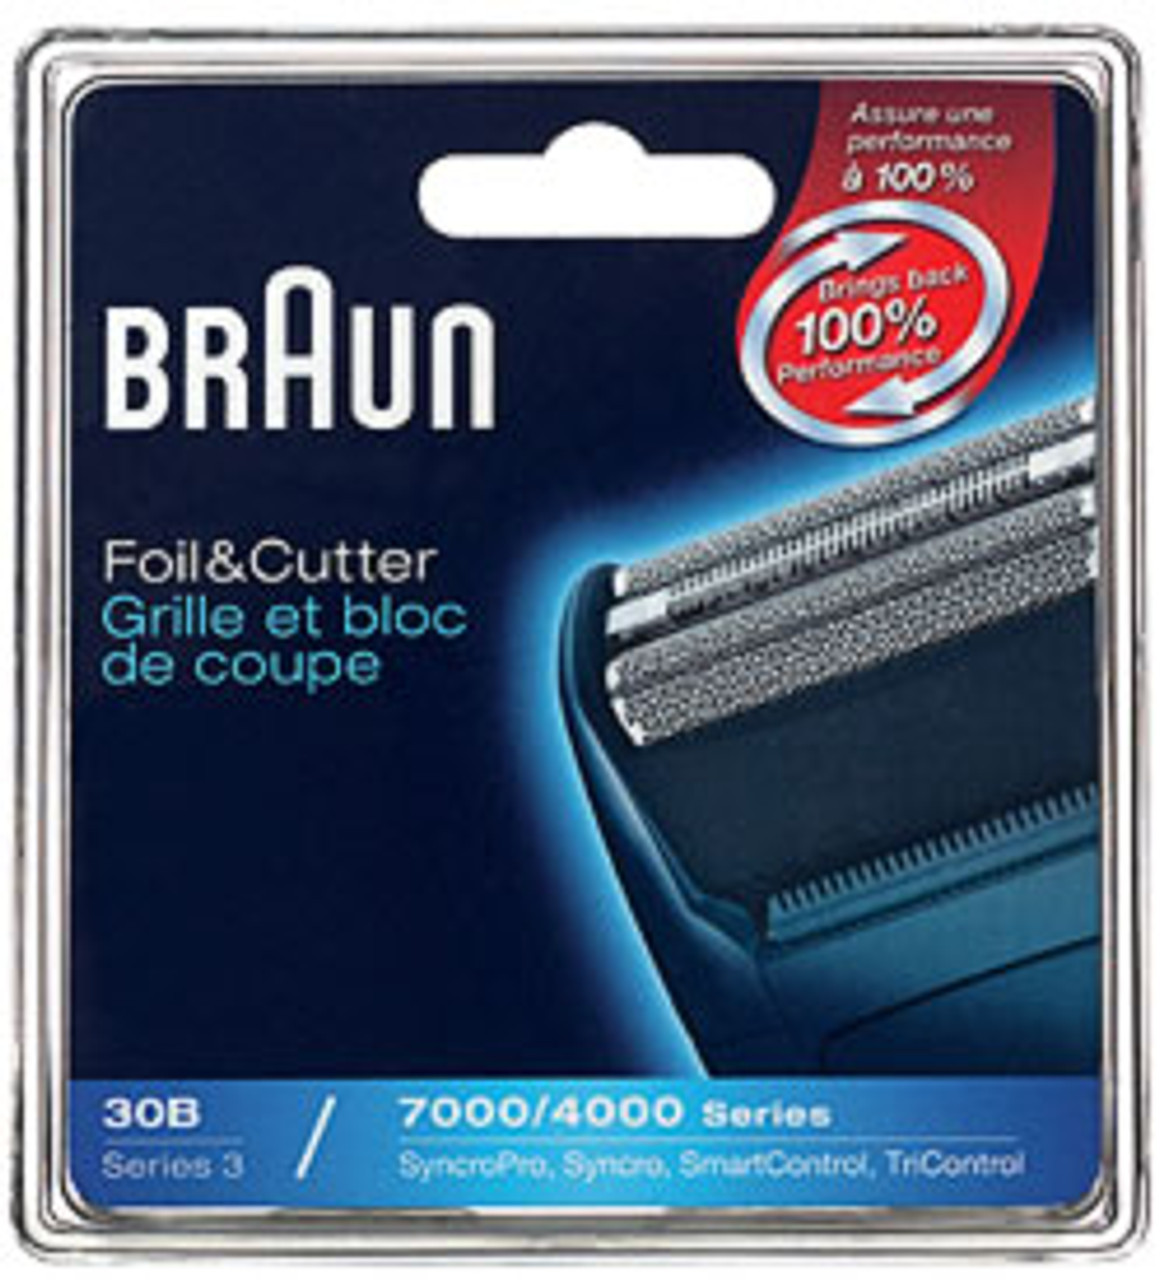 New Upgraded 30B Shaver Foil and Cutter Replacement for Braun 7570 7680  Series 7000 4000 5000 Shaver